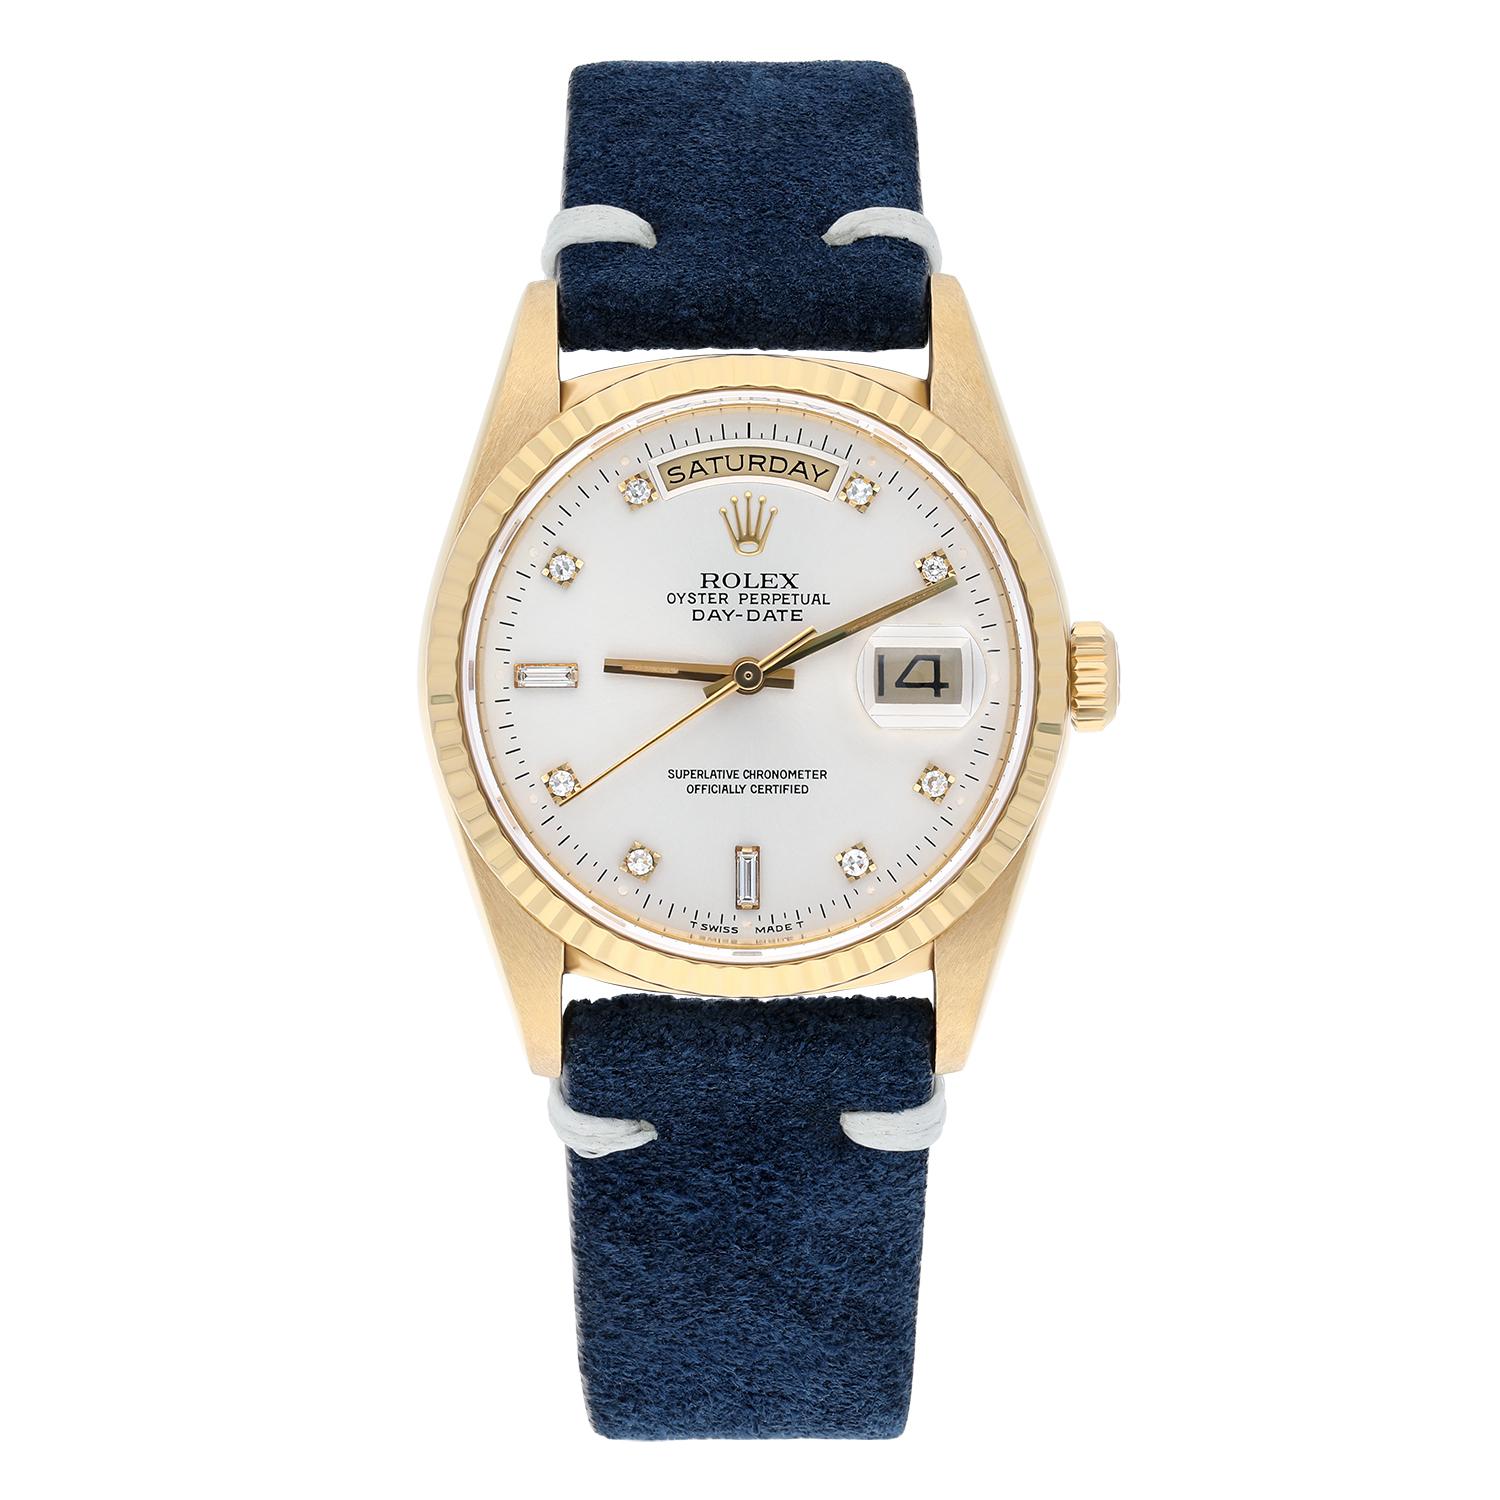 This watch has been professionally polished, serviced and does not have any visible scratches or blemishes. Leather strap and gold plated buckle are custom aftermarket. The watch itself is a genuine Rolex which has been inspected to verify